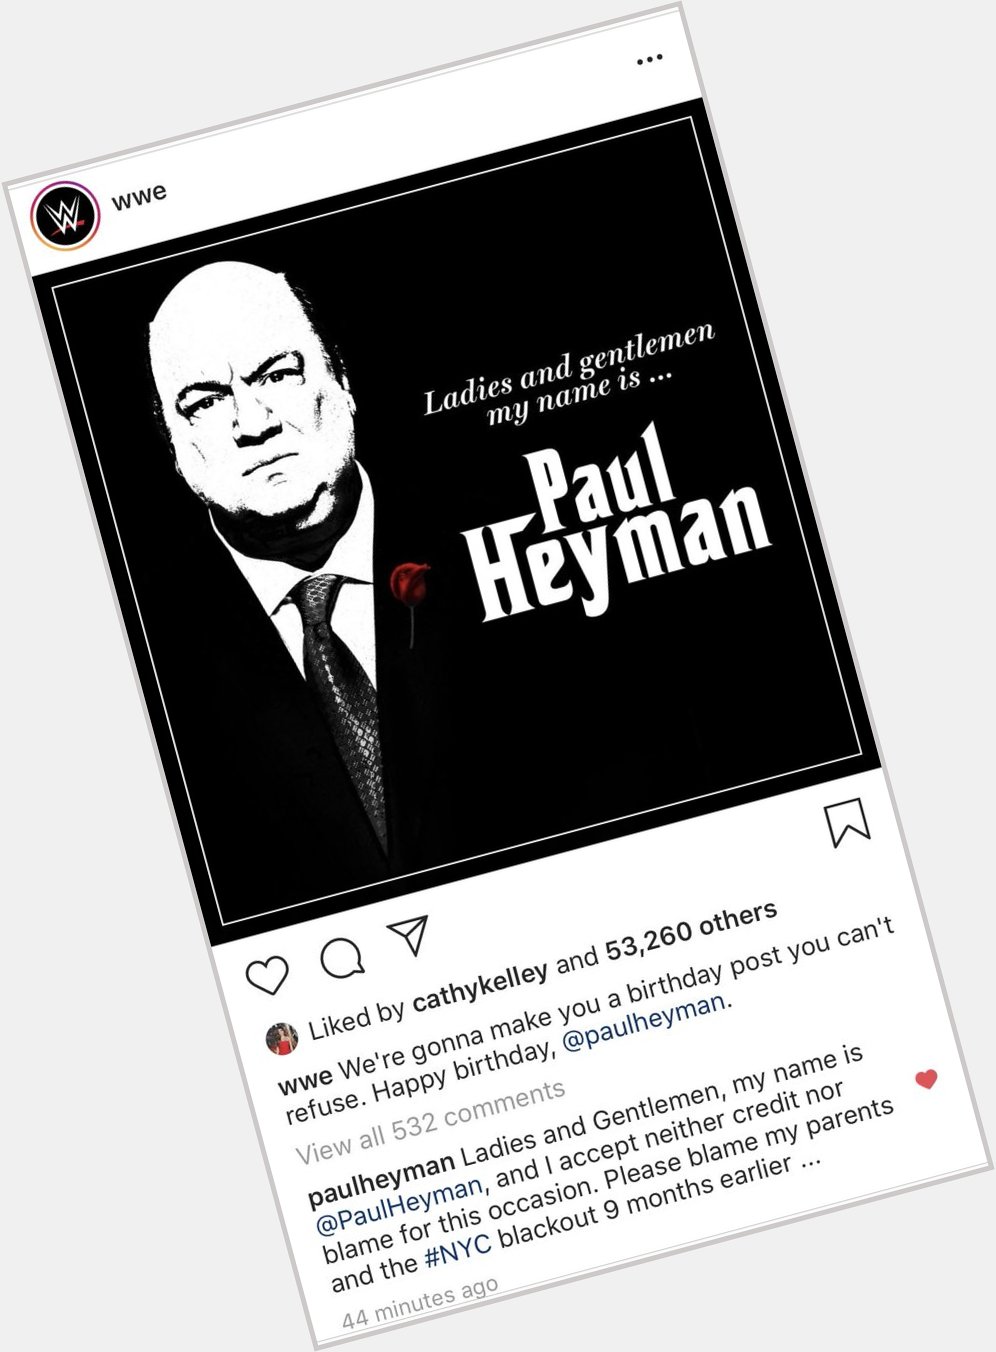 LOL at Paul Heyman s comment...Happy Birthday to one of the best managers of all time 